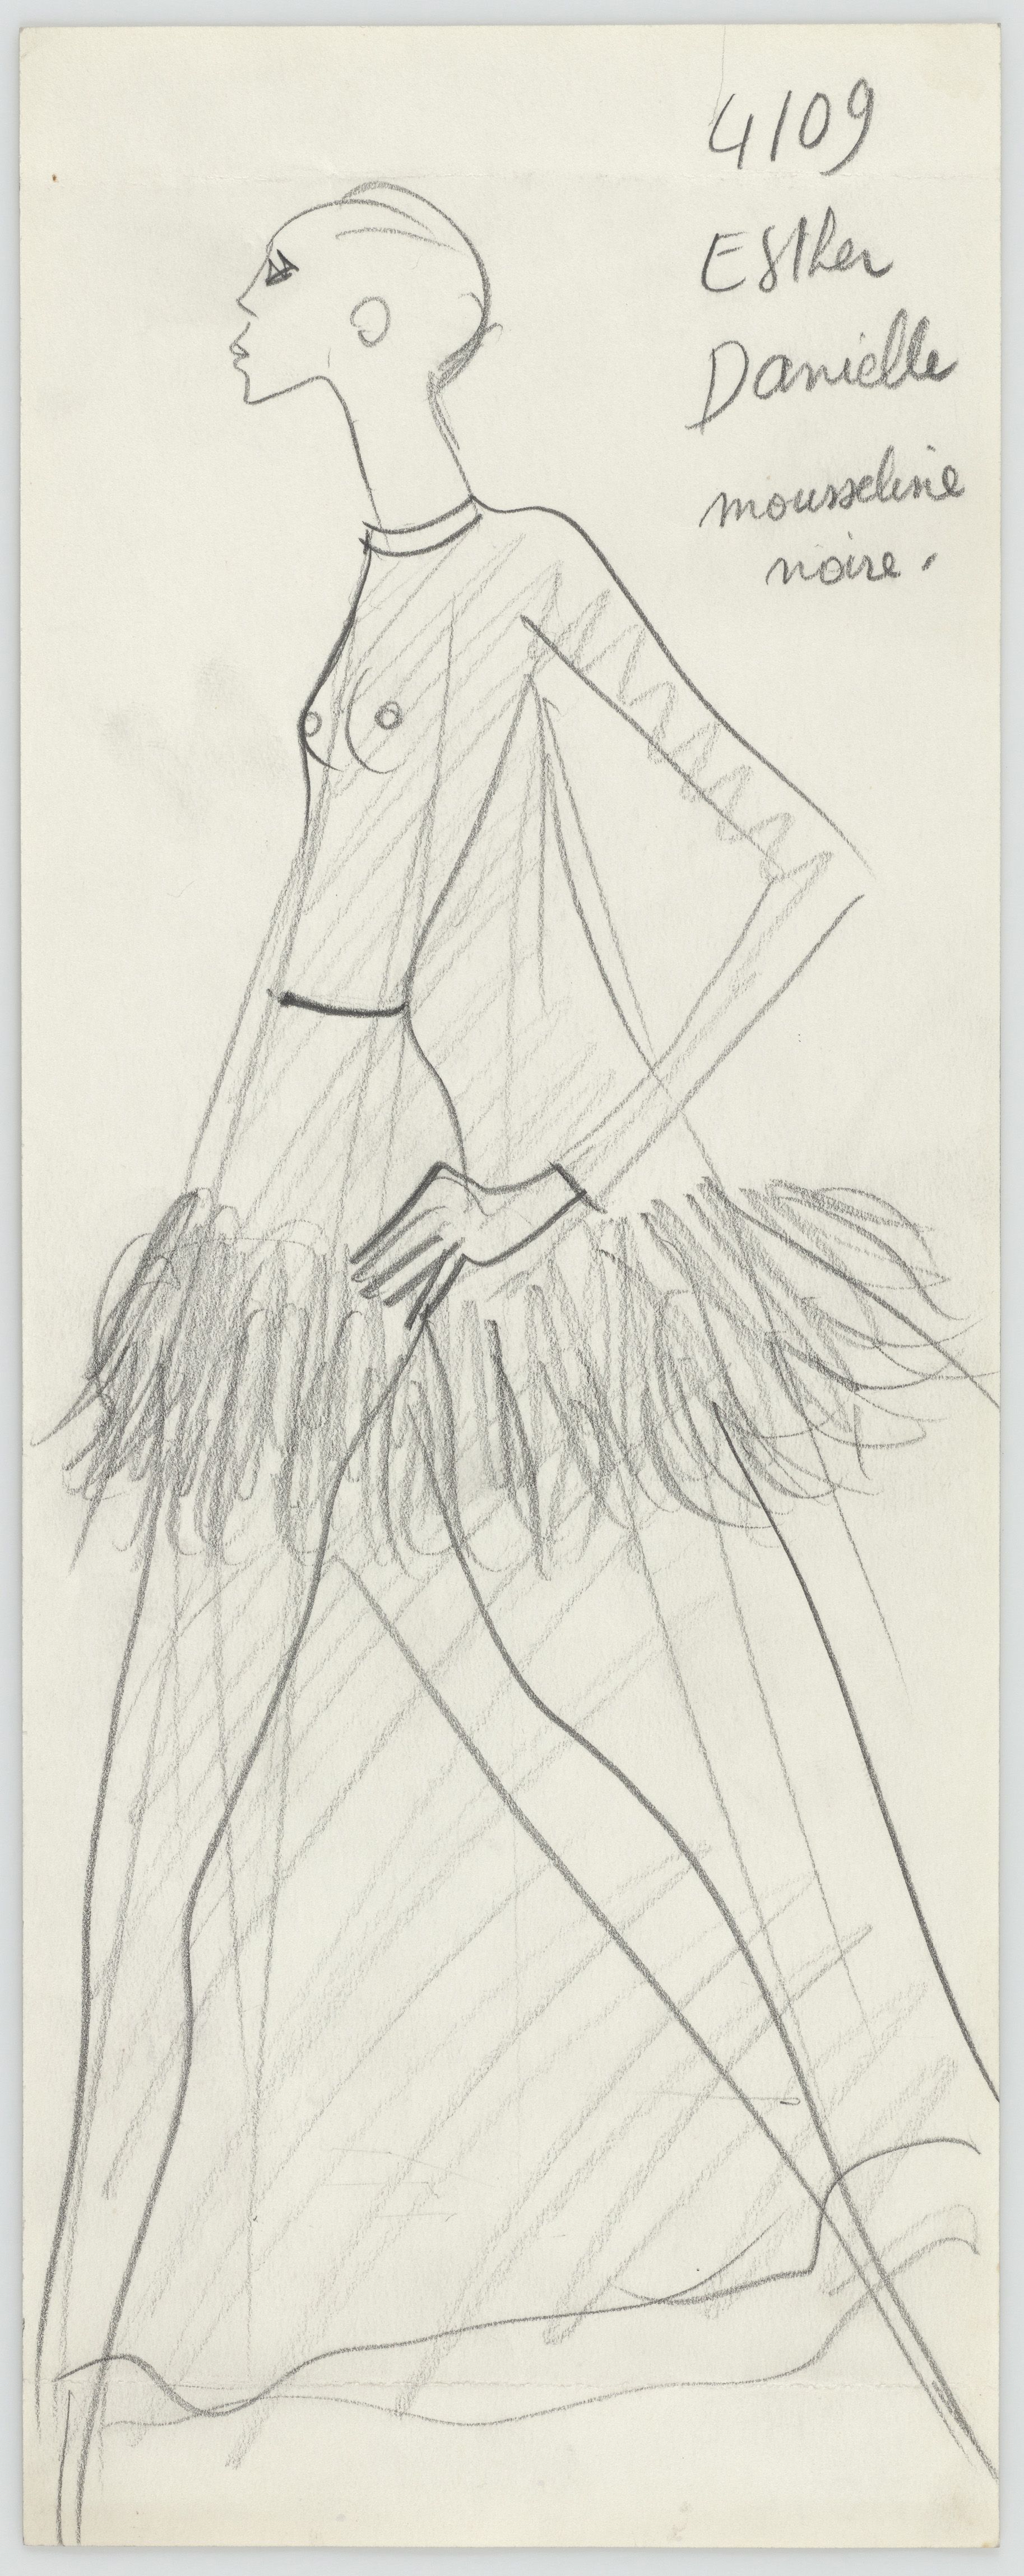 The Mystery of the Saint Laurent Sketches